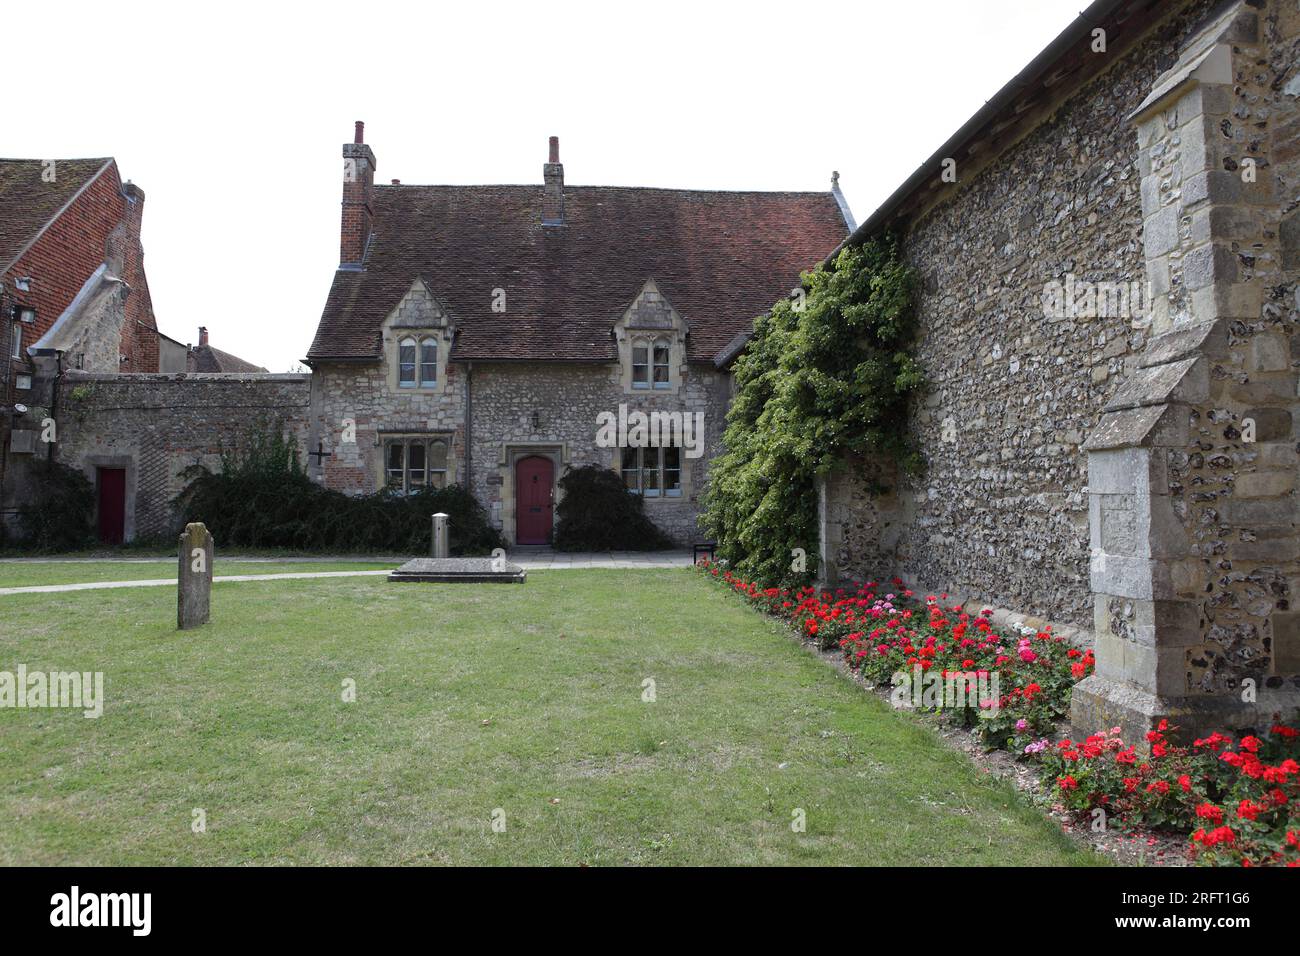 The front elevation of Cloisters Cottage set in the grounds of Chichester Cathedral in West Sussex, England. Stock Photo